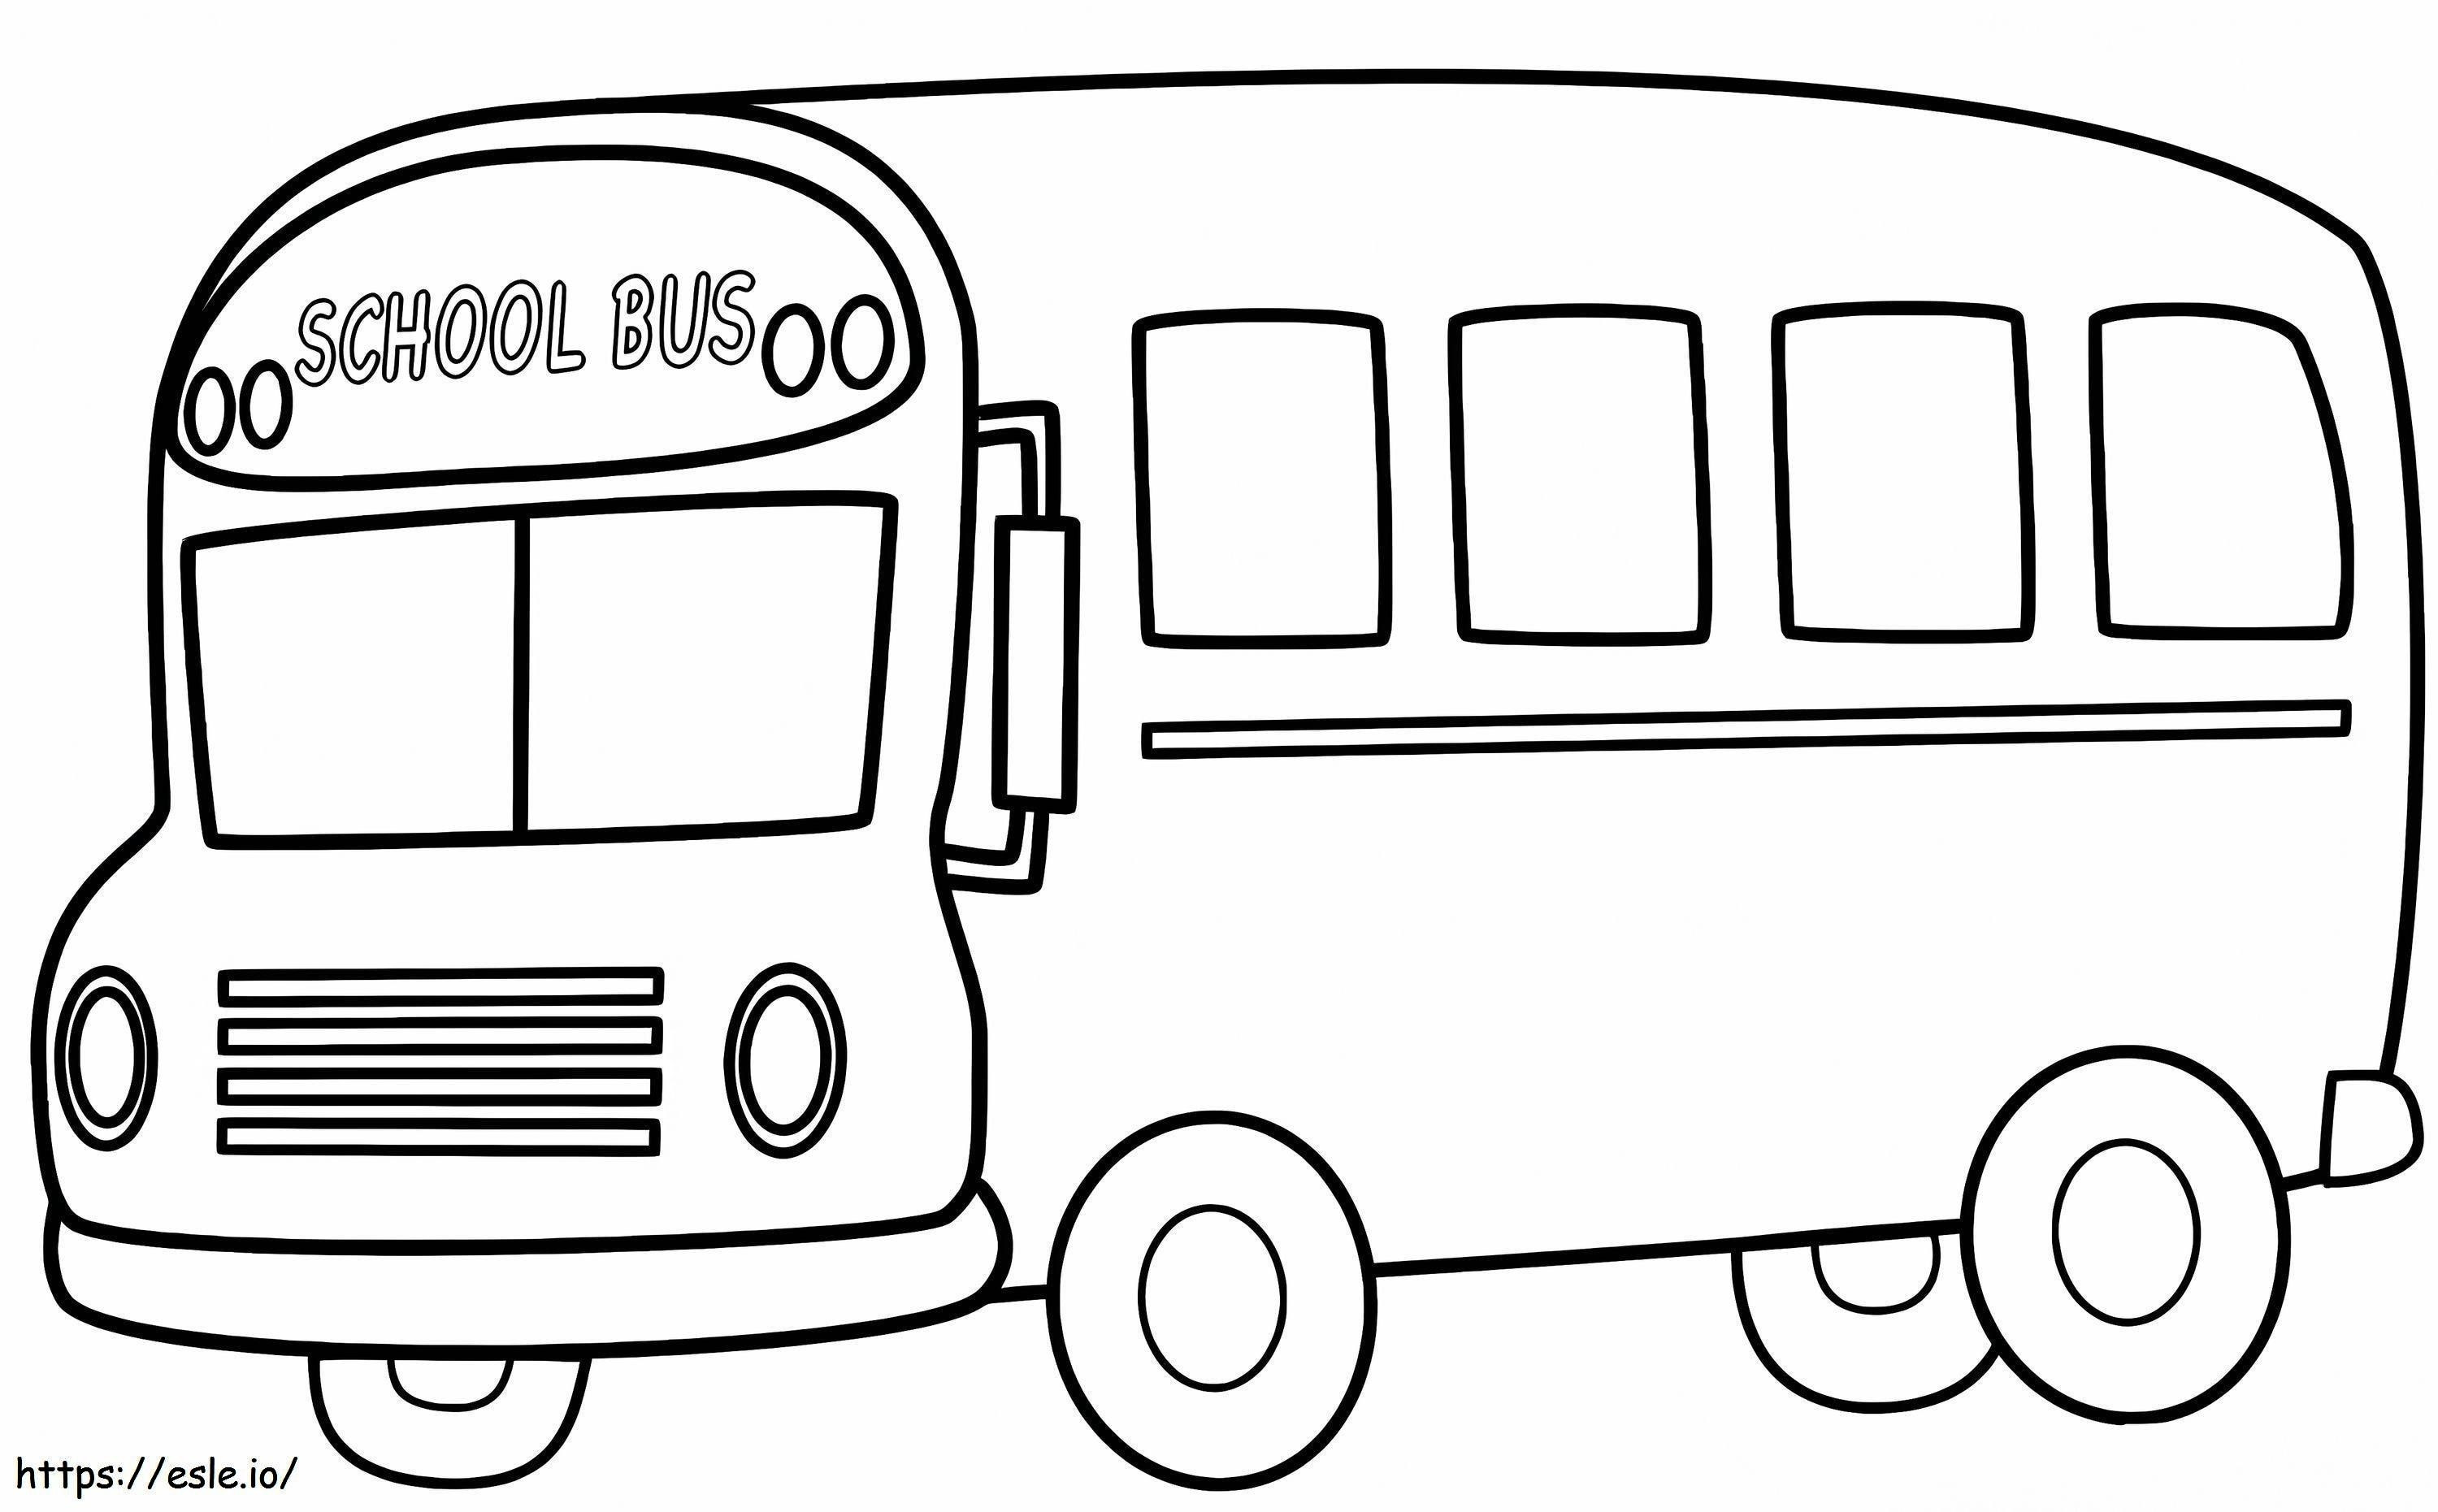 Awesome School Bus coloring page